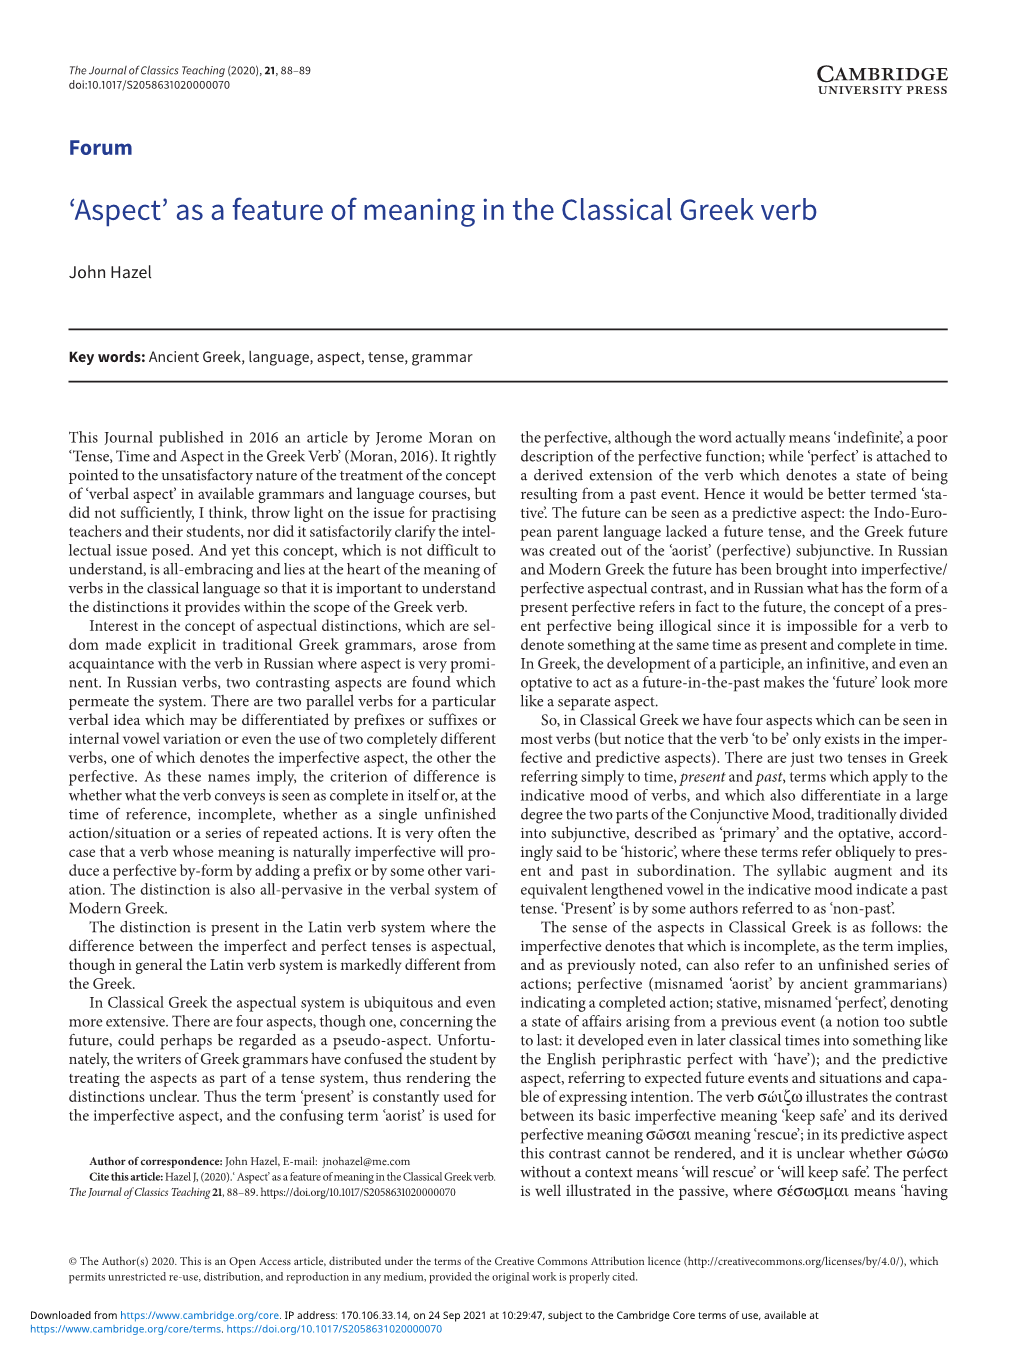 'Aspect' As a Feature of Meaning in the Classical Greek Verb